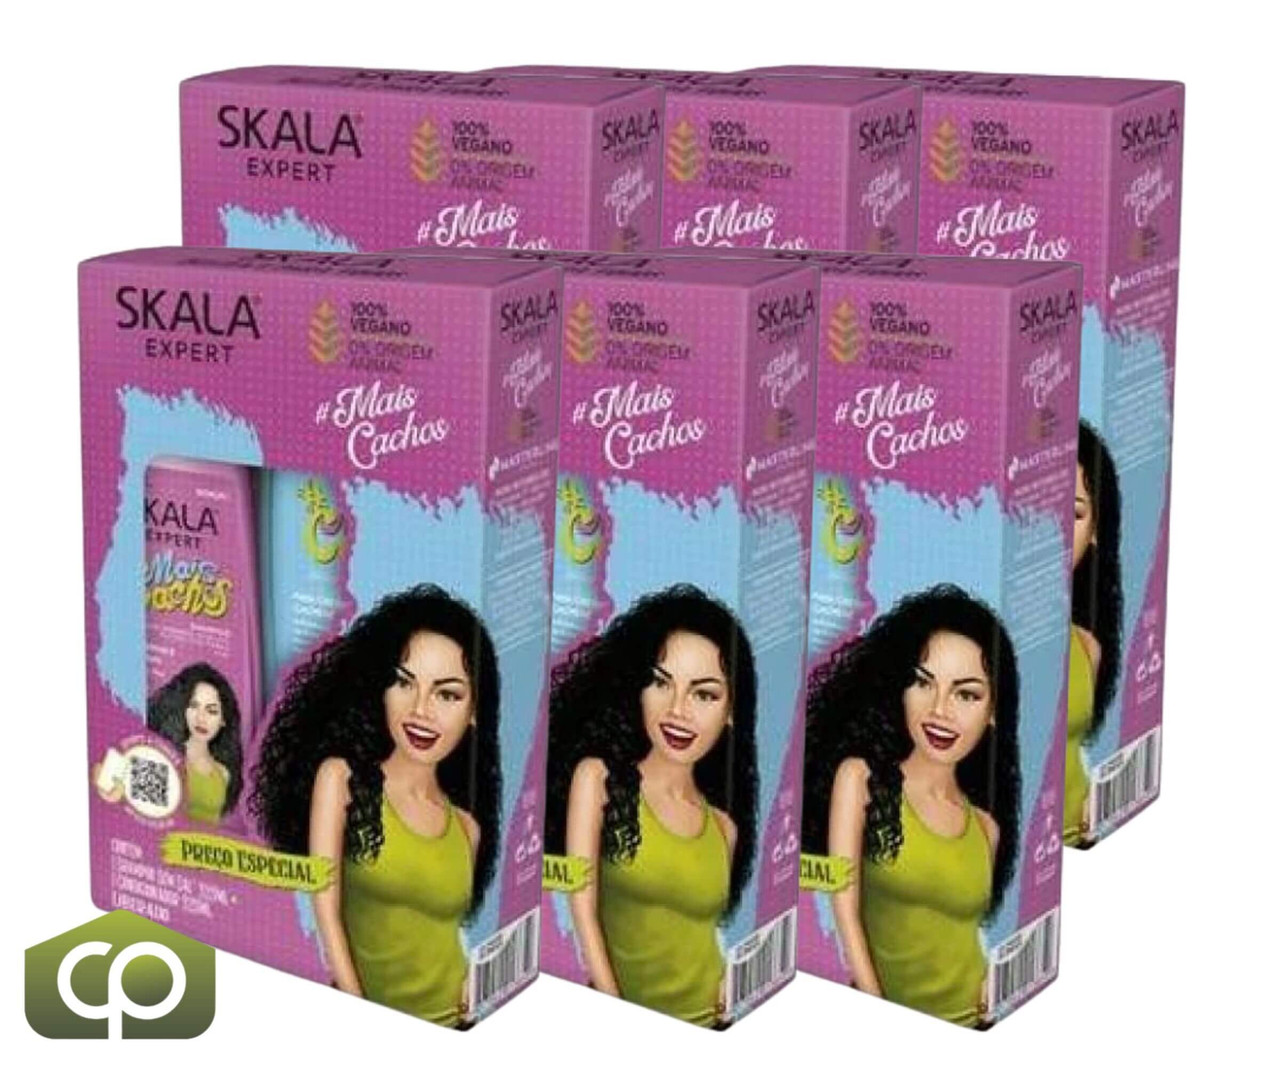 Skala Expert 'More Curls' Shampoo + Conditioner Kit - 6 Packs (12 Units x 325ml) - Chicken Pieces